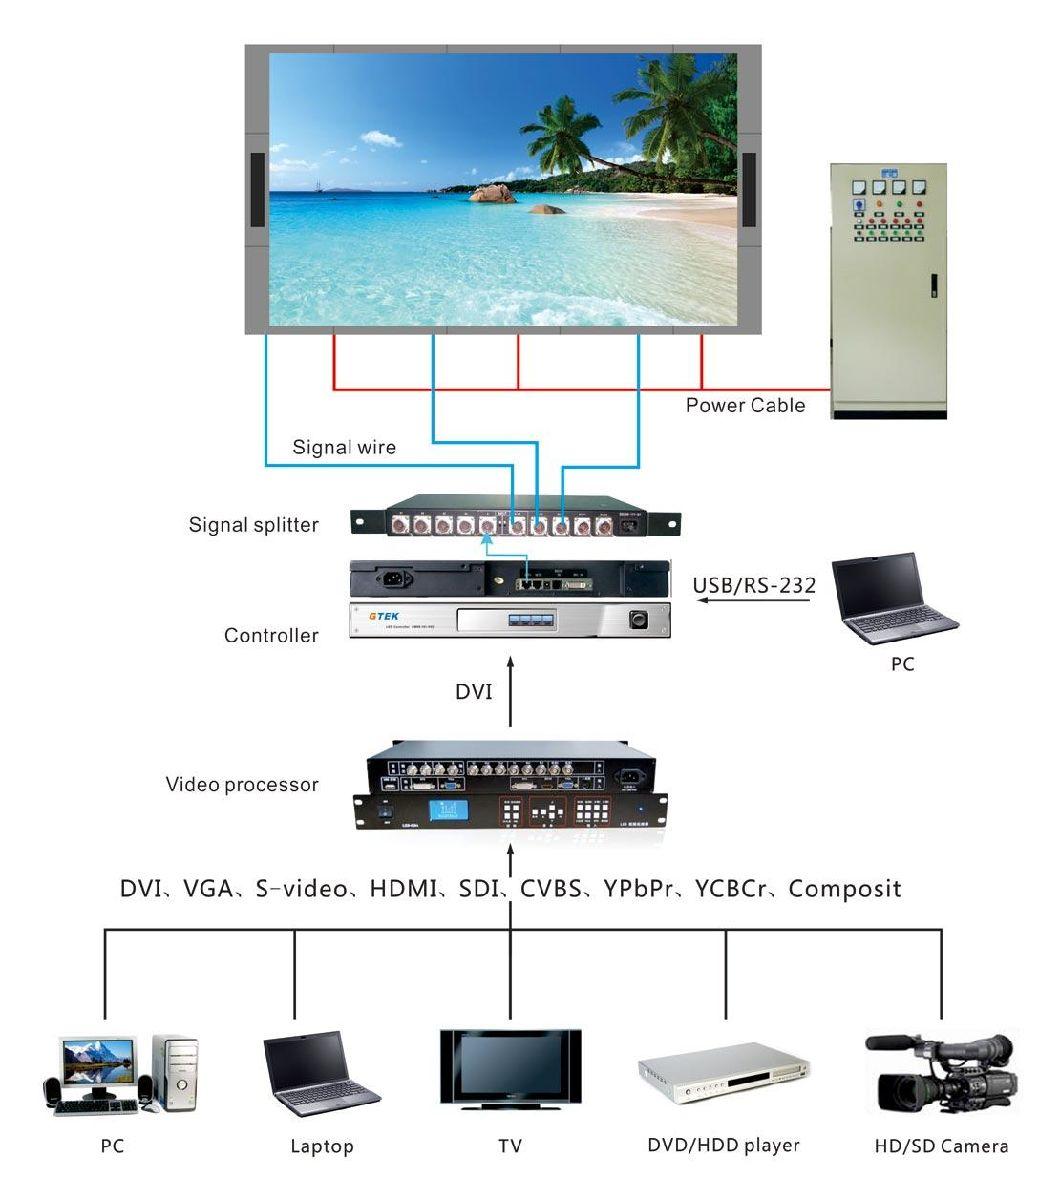 P6mm Outdoor Full Color Electronic Display Board for Advertising Purpose